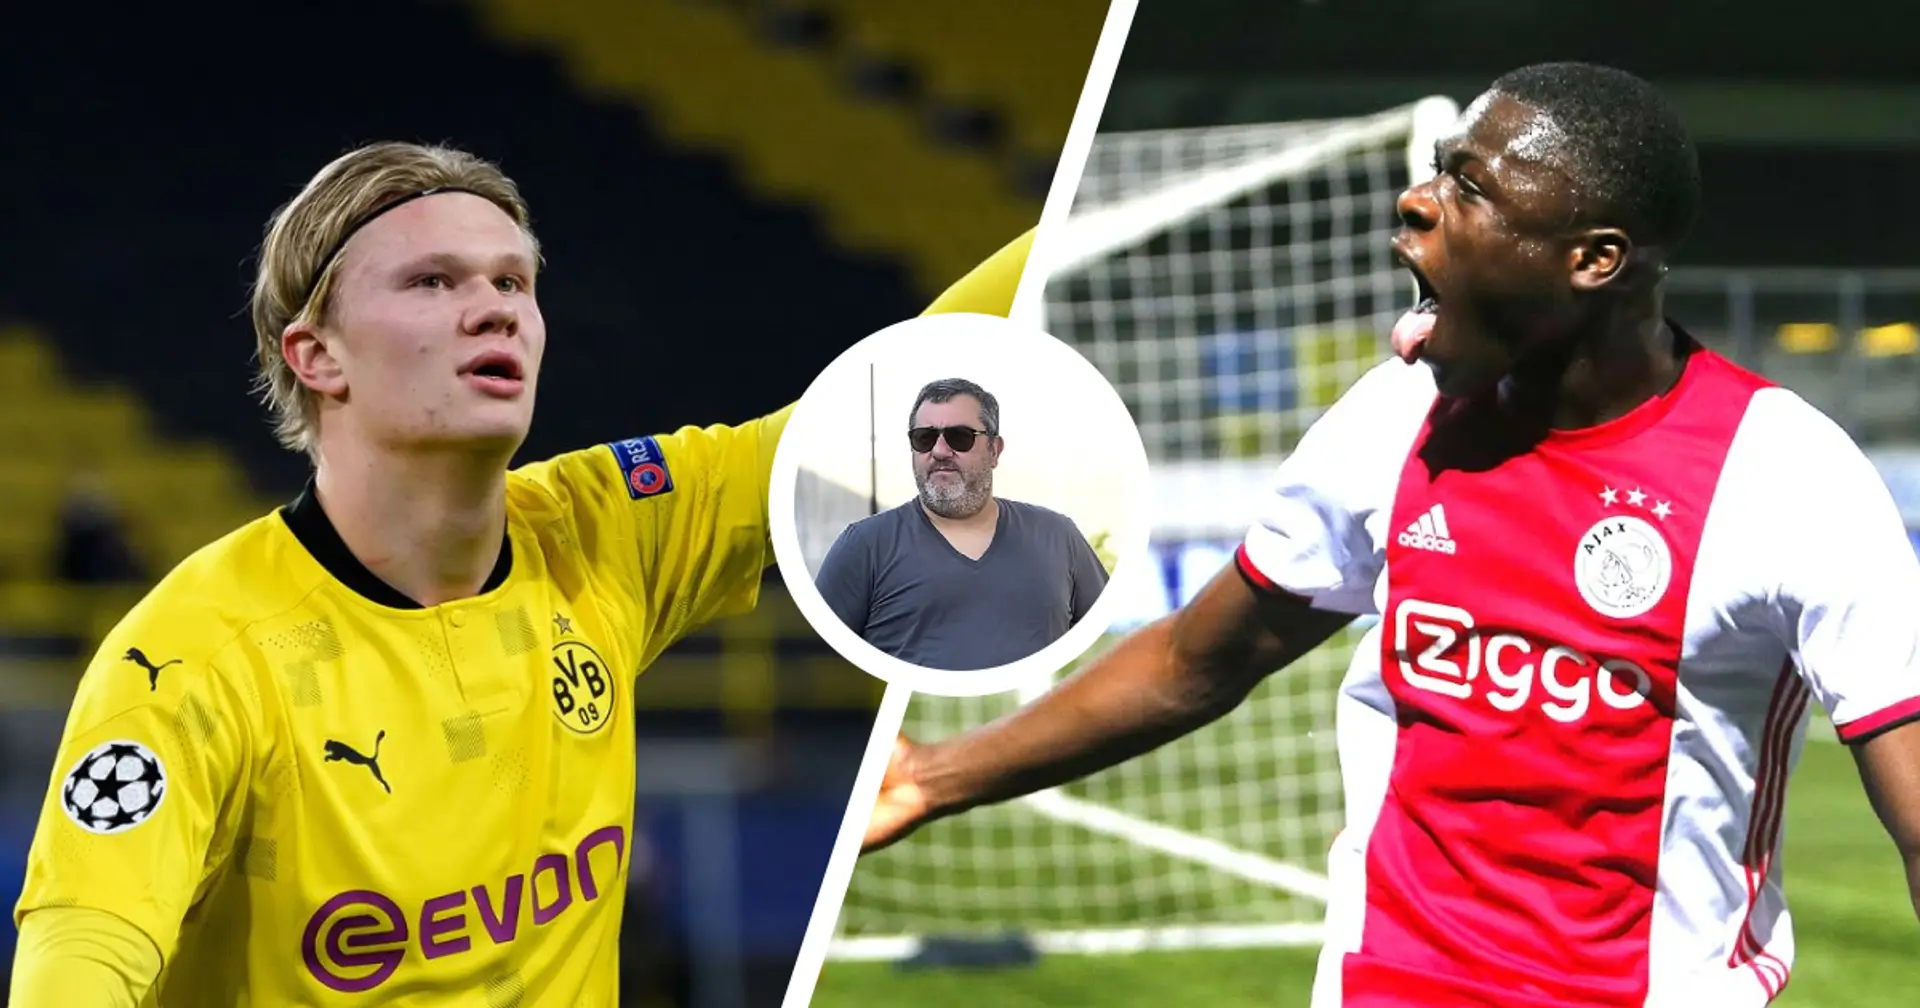 Dortmund already found another wonderkid to replace Haaland – and he's Mino Raiola's client